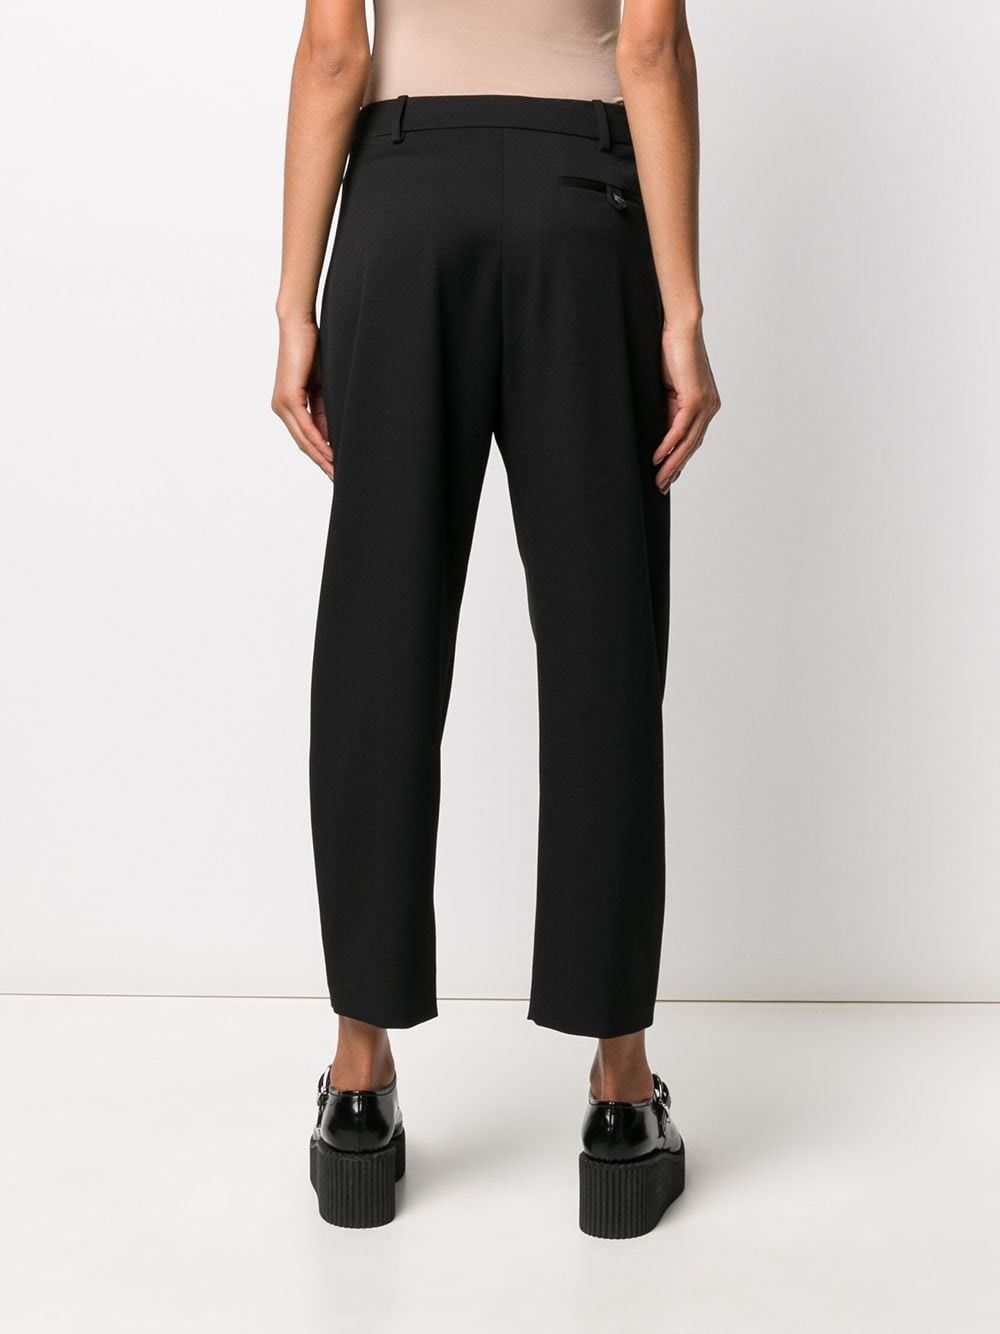 stella mccartney DAWSON TROUSERS available on montiboutique.com - 35934